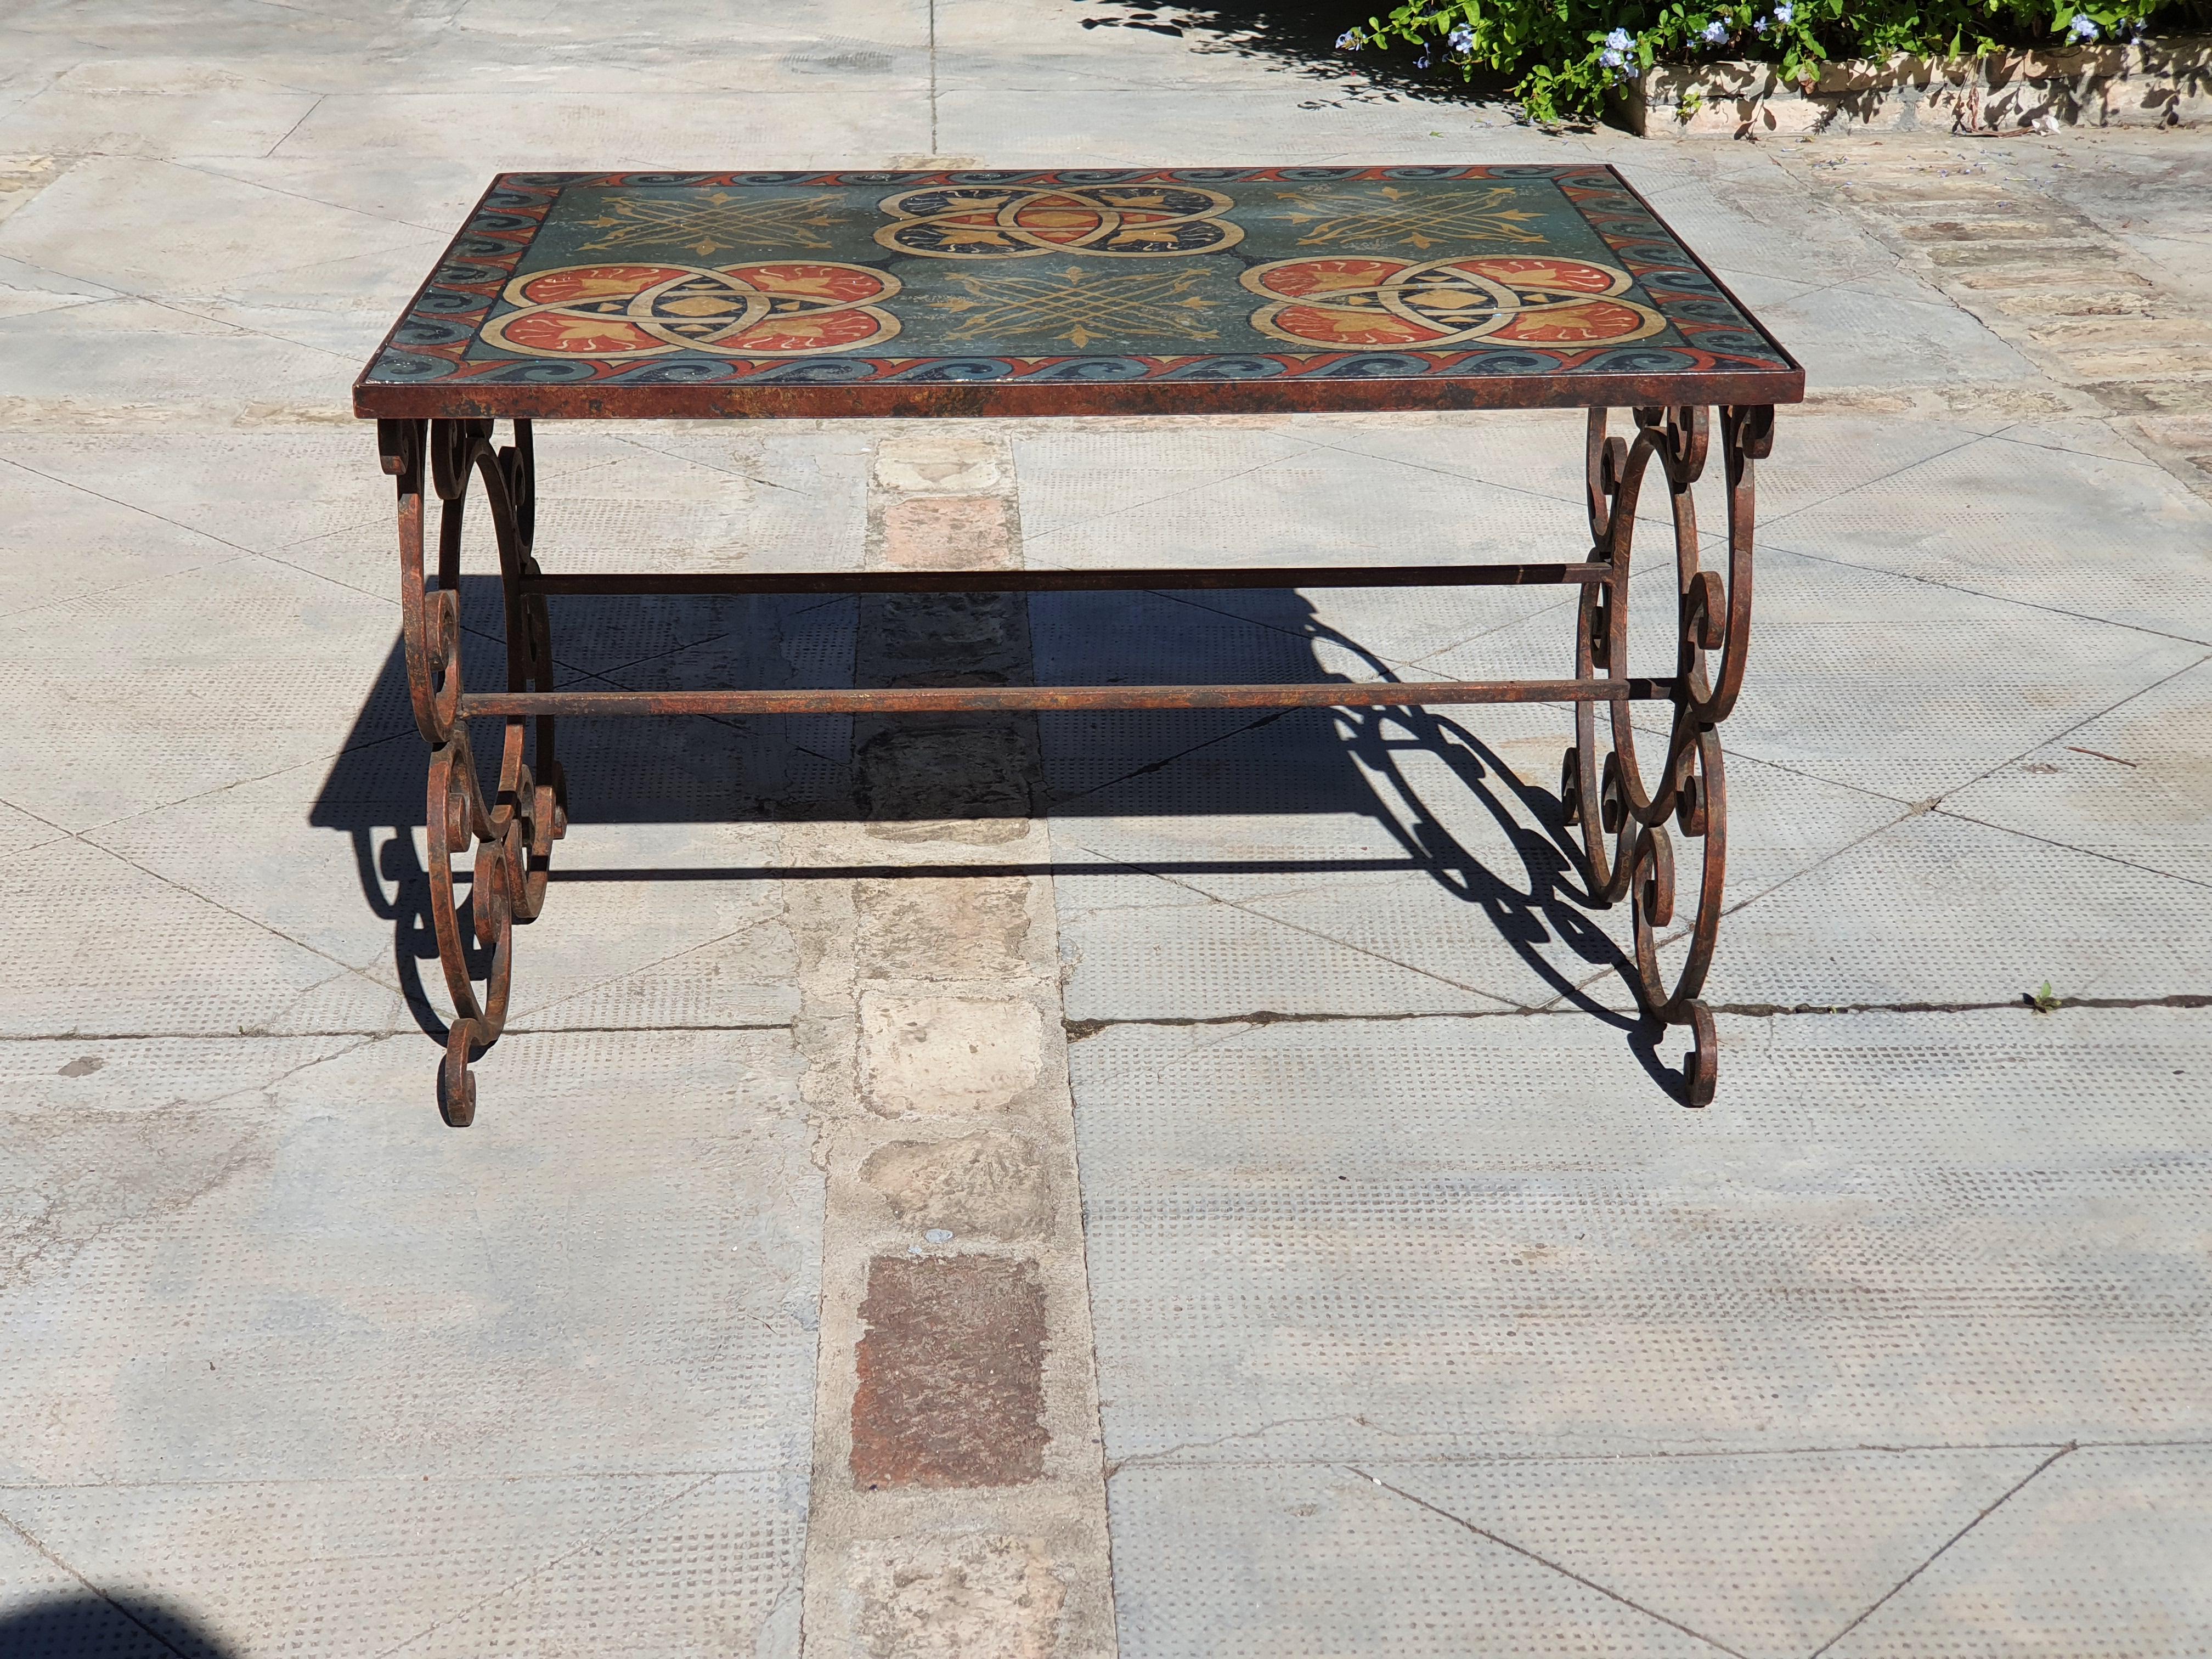 Renaissance 21st Century Italian Wrought Iron and Hand-Painted Wood Coffee Table, 2010 For Sale